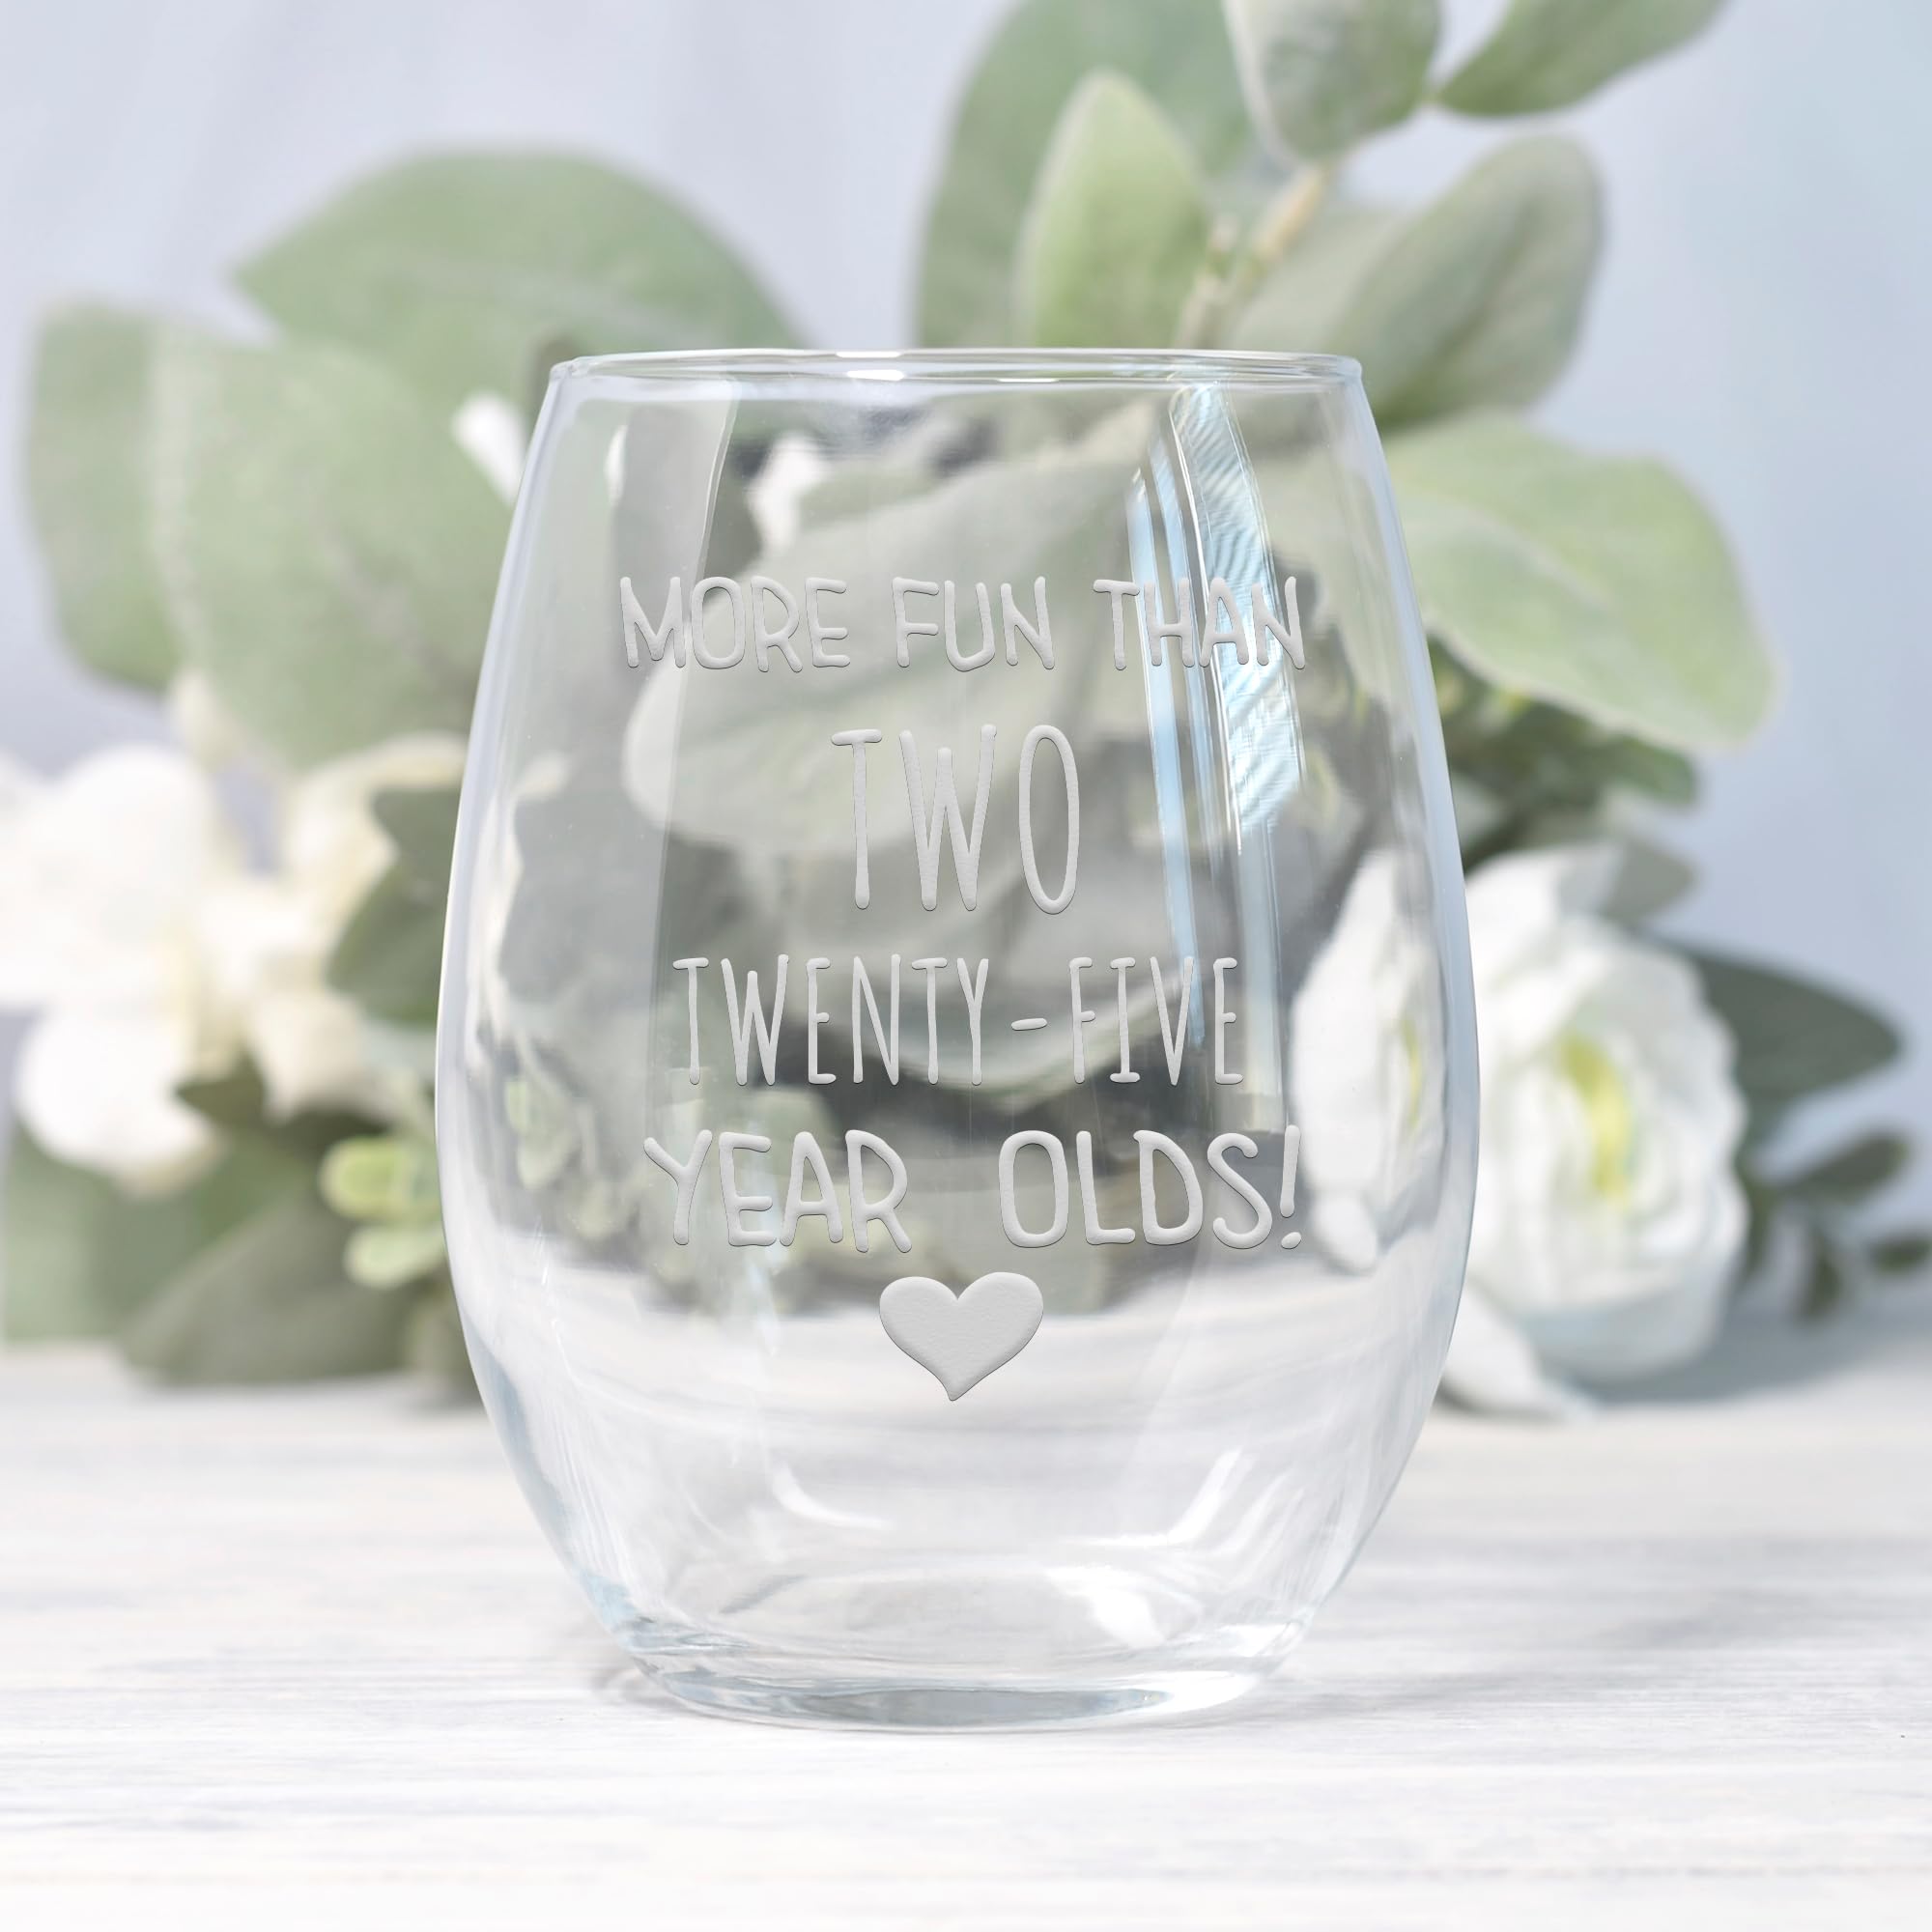 More Fun Than Two Twenty Five Year Olds Stemless Wine Glass - 50Th Birthday, Birthday Girl, Birthday For Her, 50Th Birthday Gift, 50 And Fabulous, 50Th Wine Glass